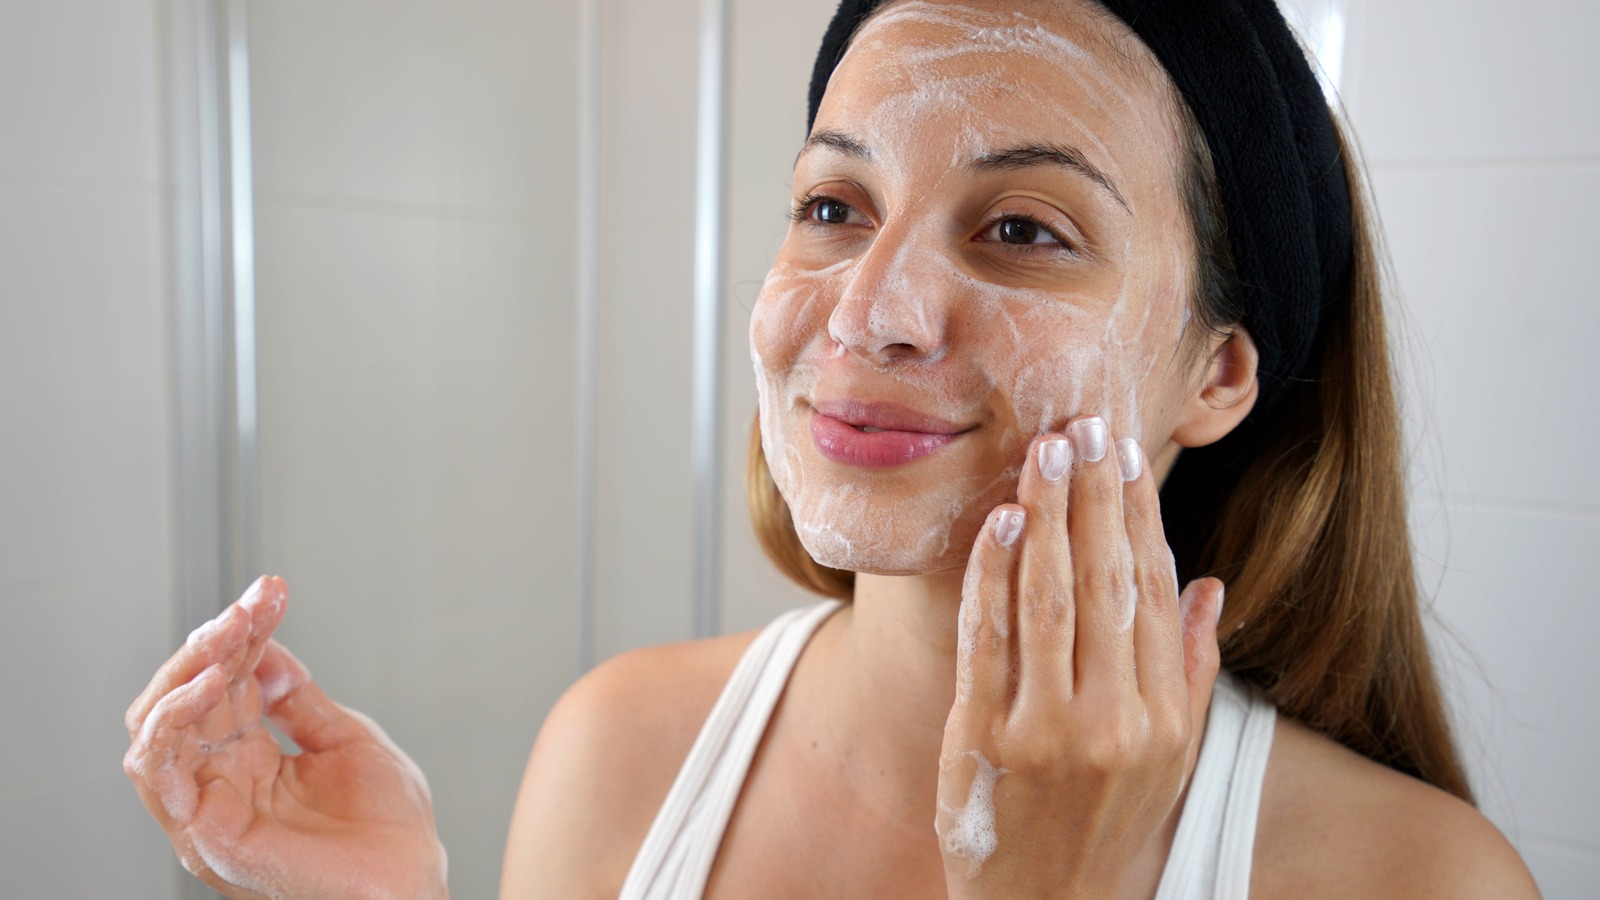 FYI, DIY Baking Soda Scrubs Are Not The Answer To Your Skin Woes pic